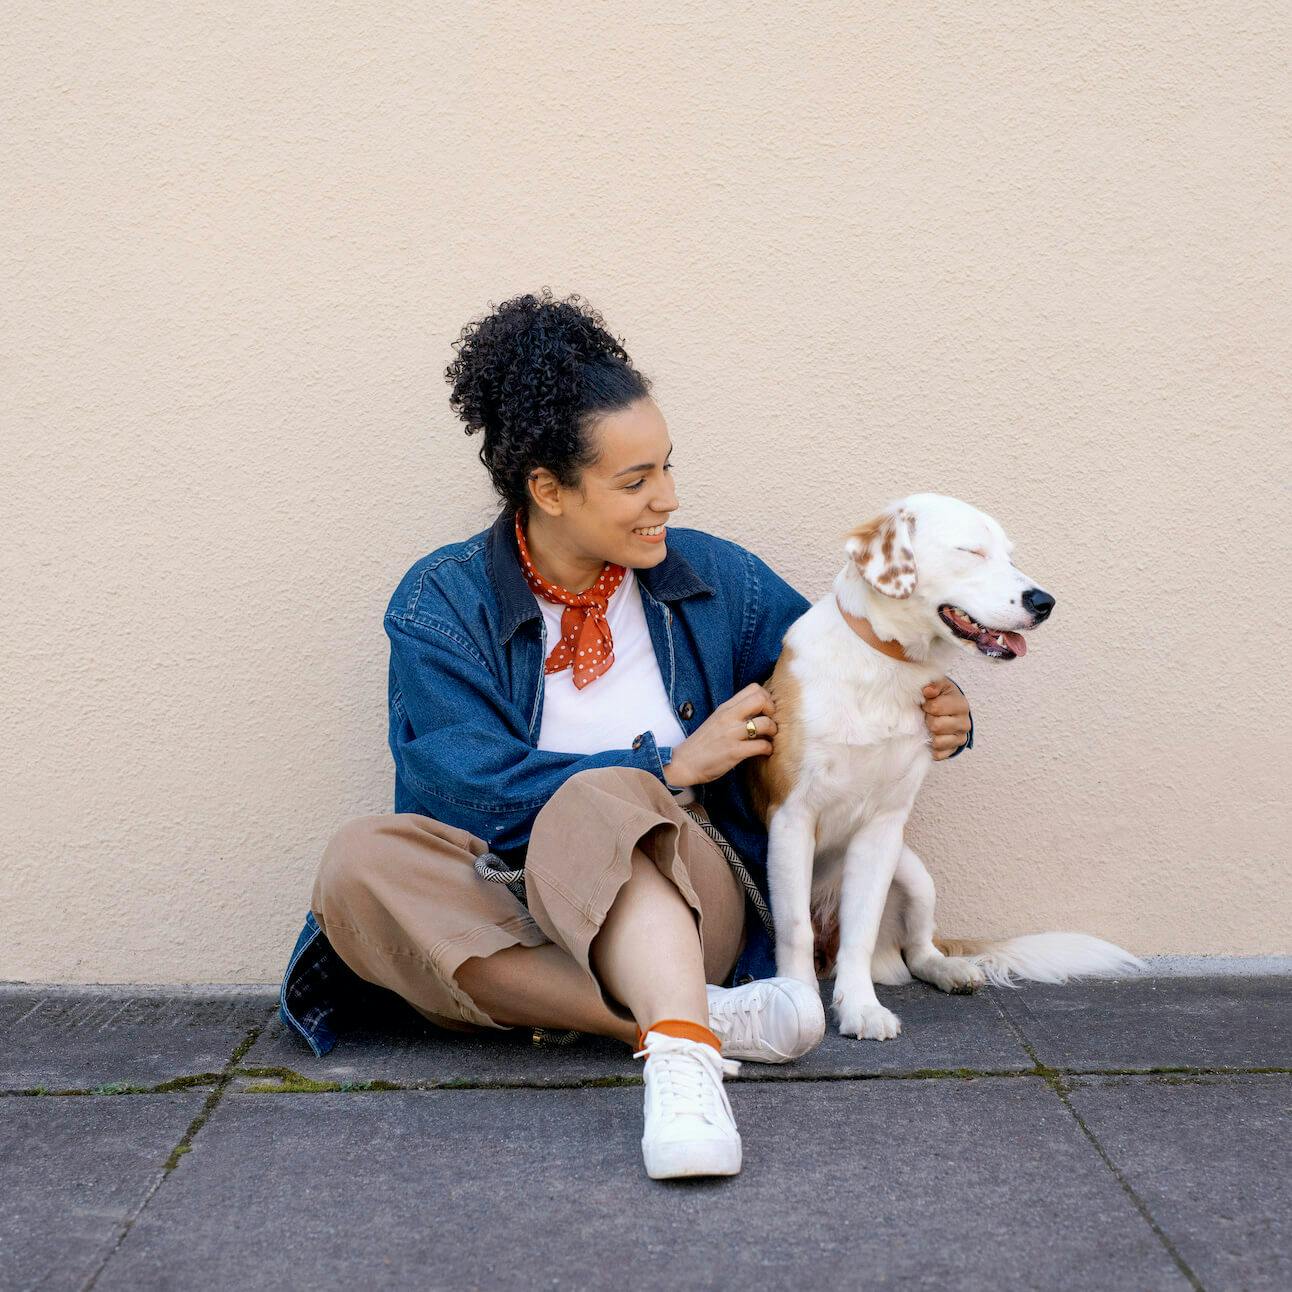 Smiling woman sitting with dog together